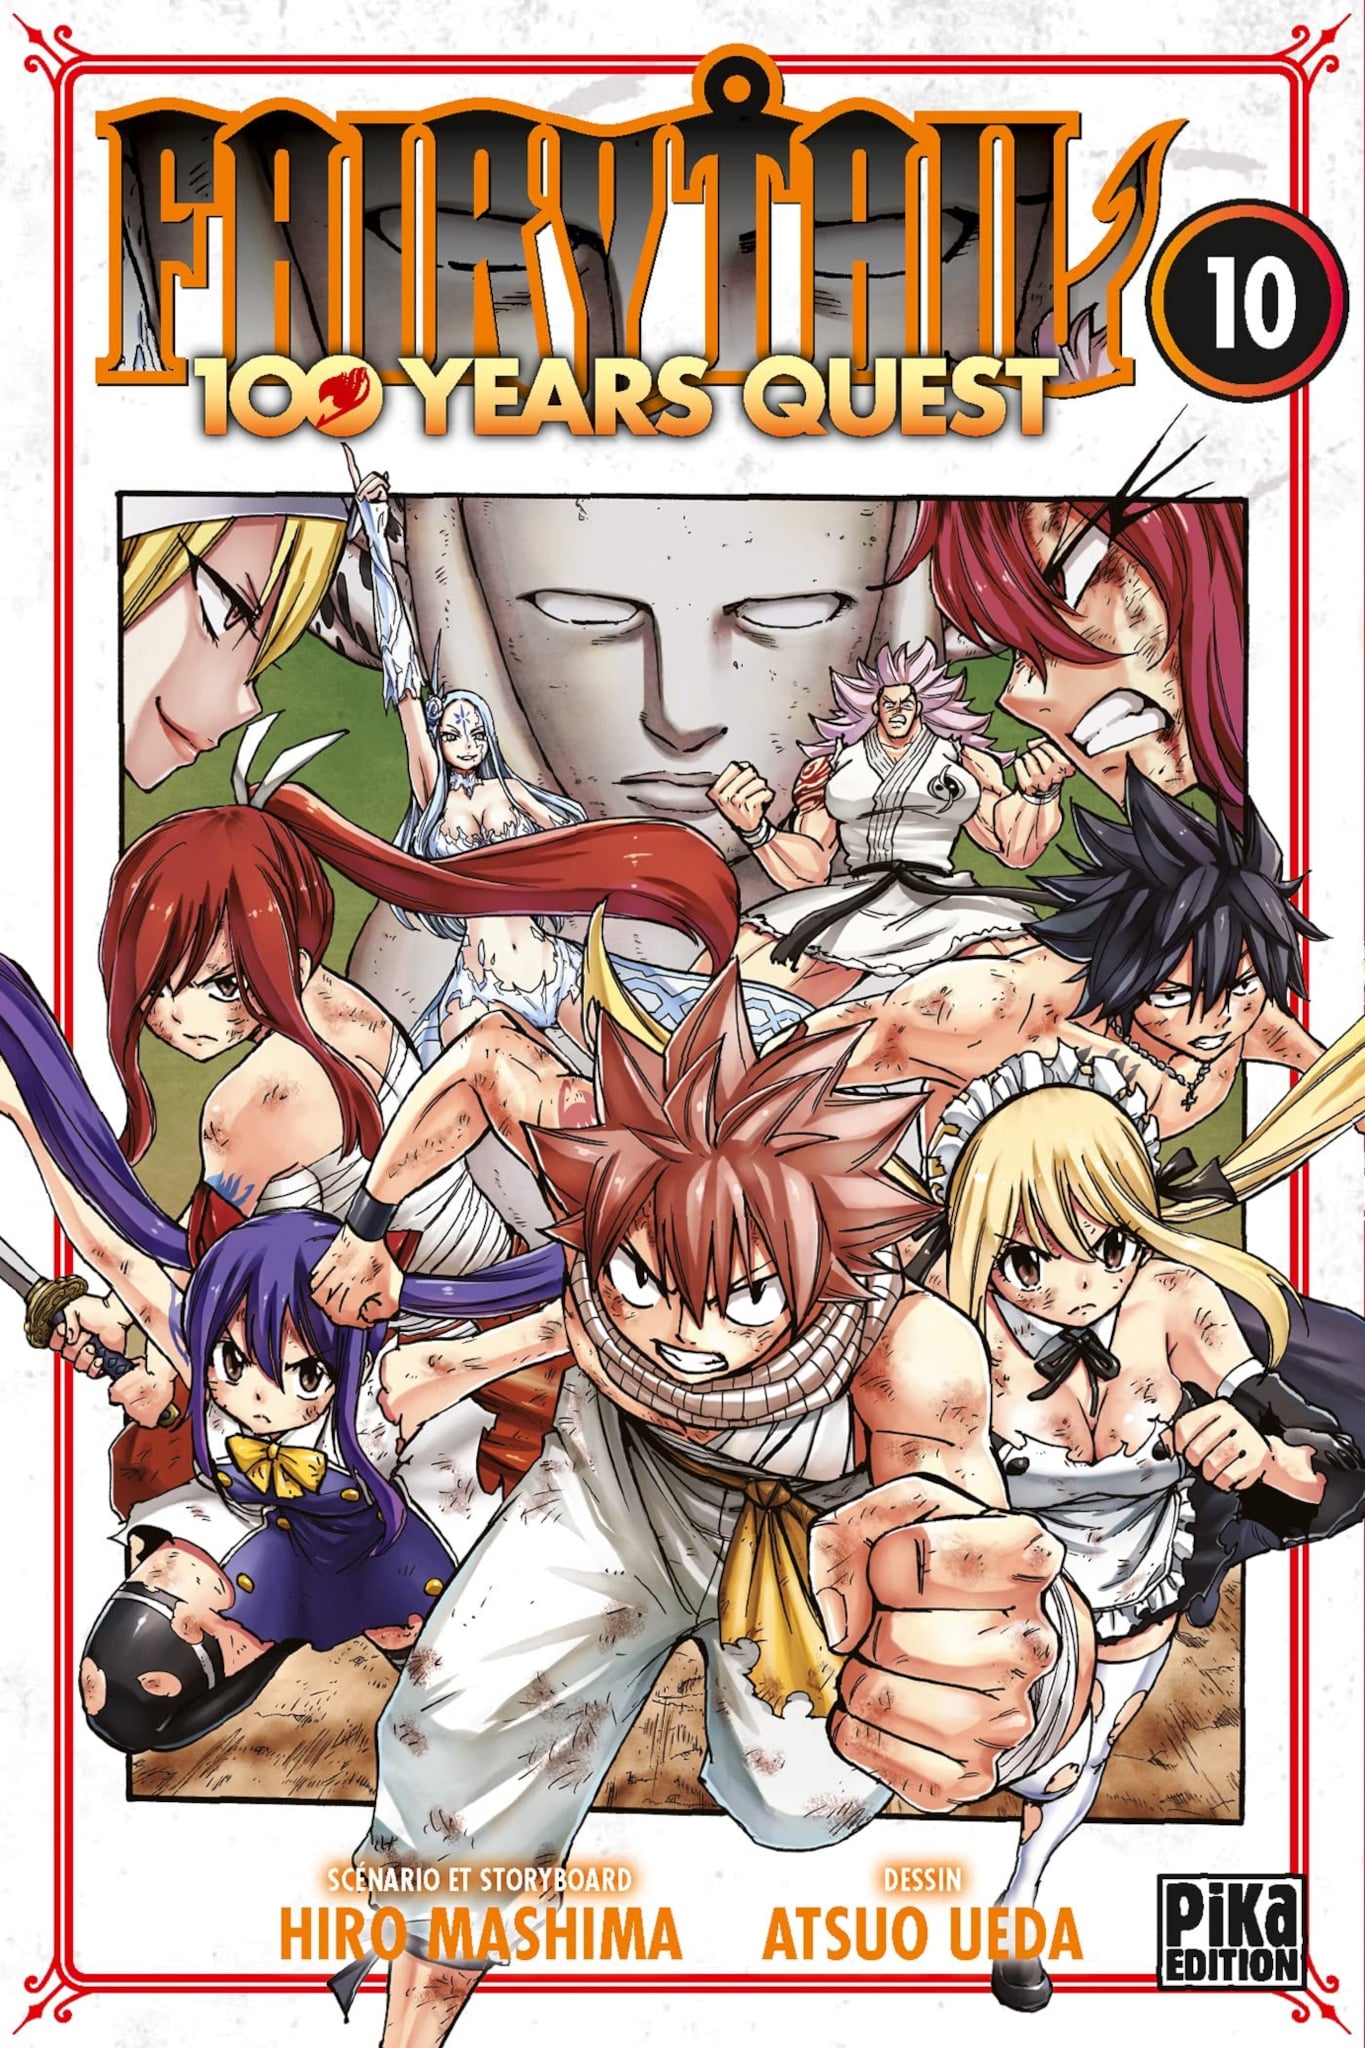 Tome 10 du manga Fairy Tail : 100 Years Quest